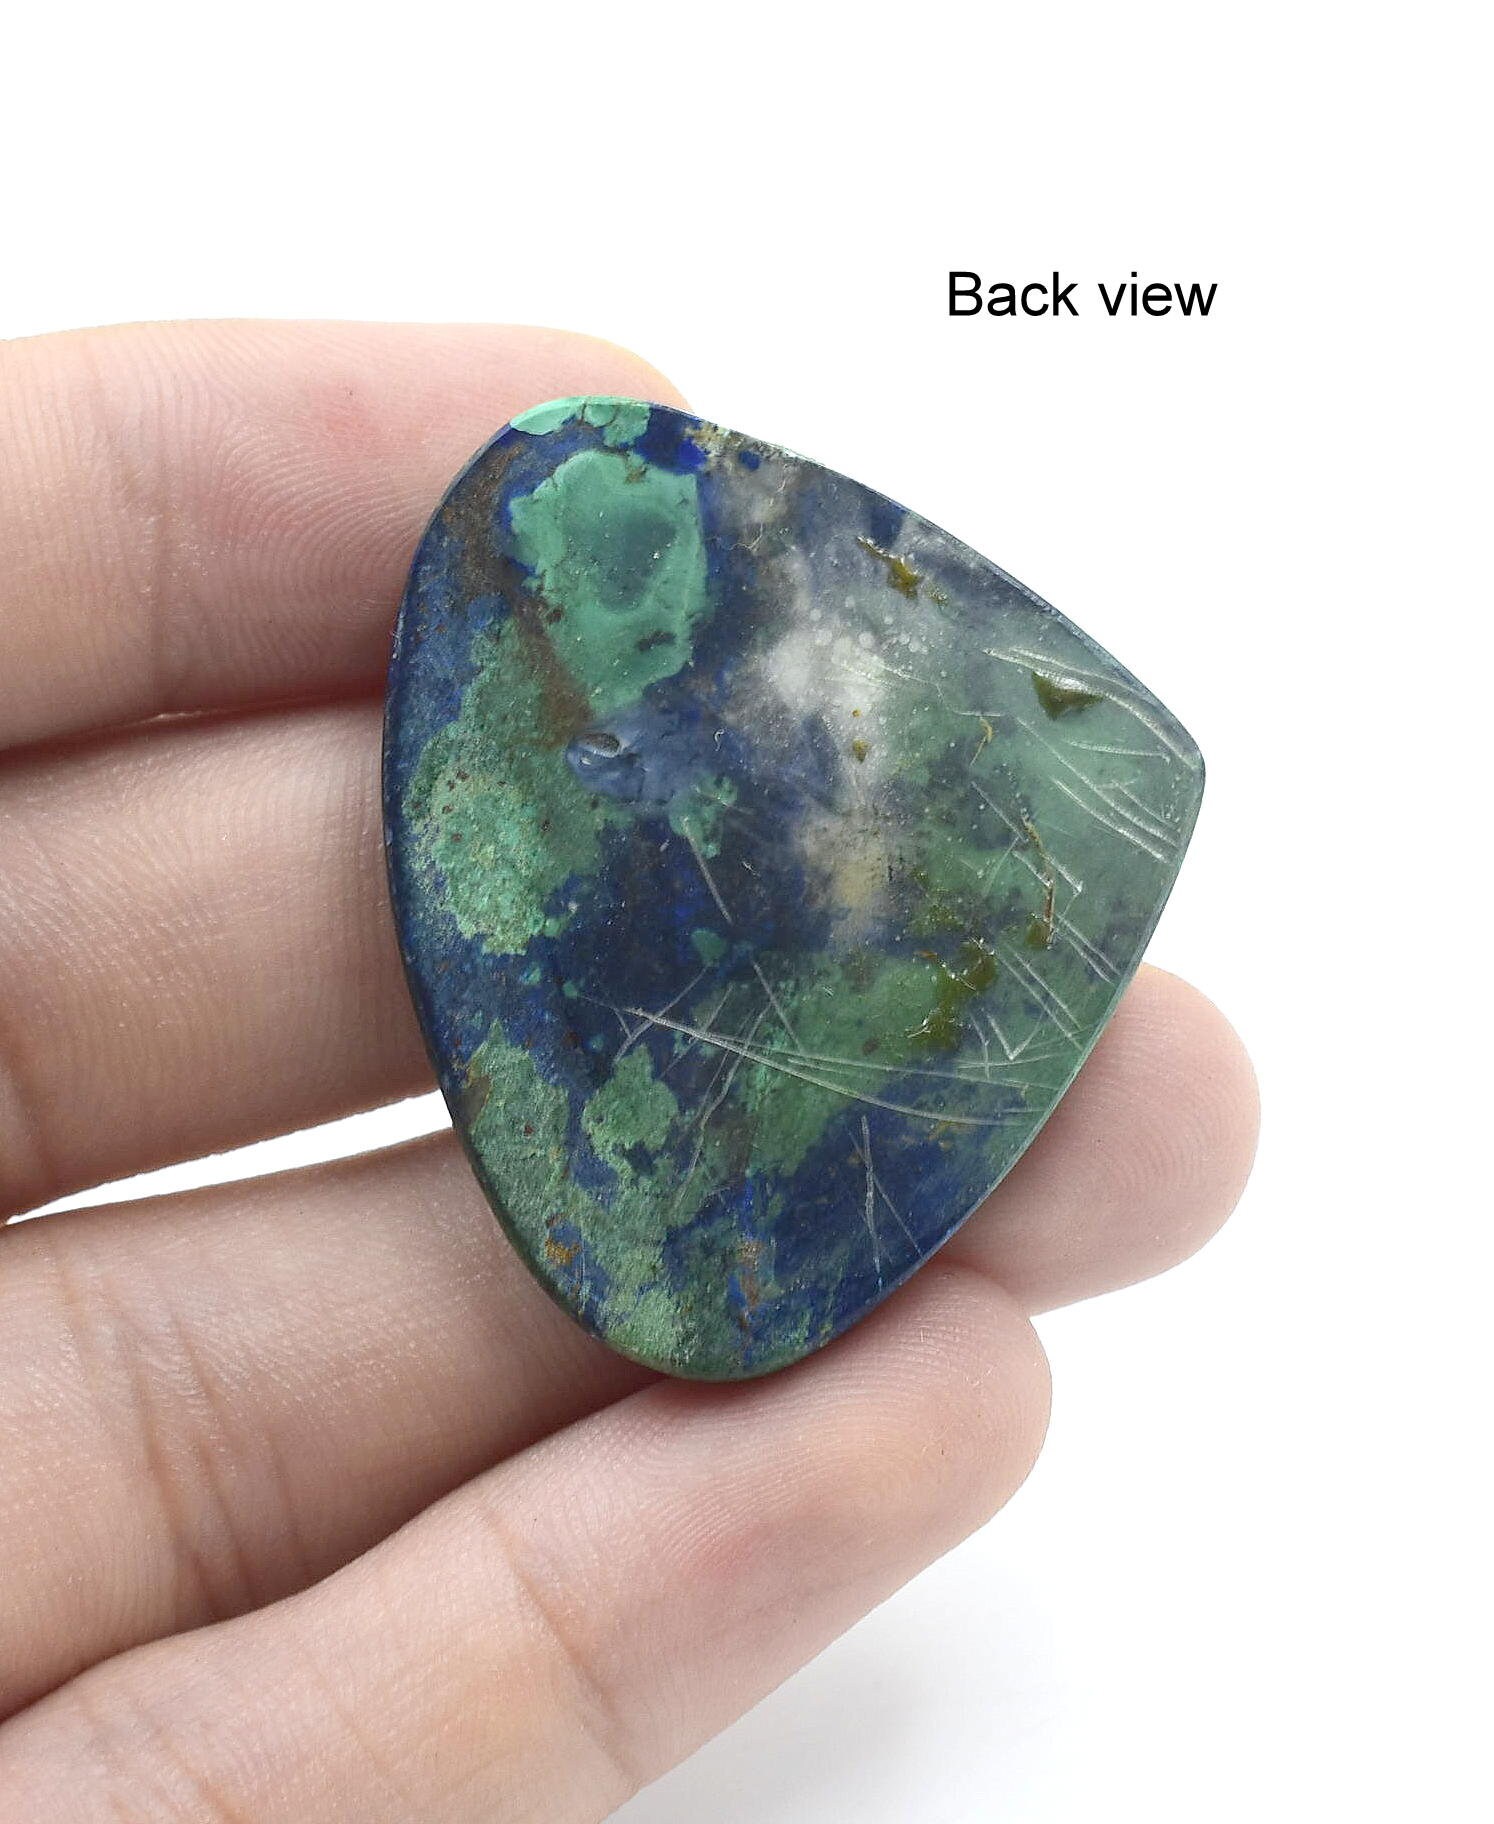 100% Natural Azurite Malachite Cabochon Good quality stone Beautiful Art Making for jewellery Ring 78.75 CARAT 33X40X6 MM | Save 33% - Rajasthan Living 15